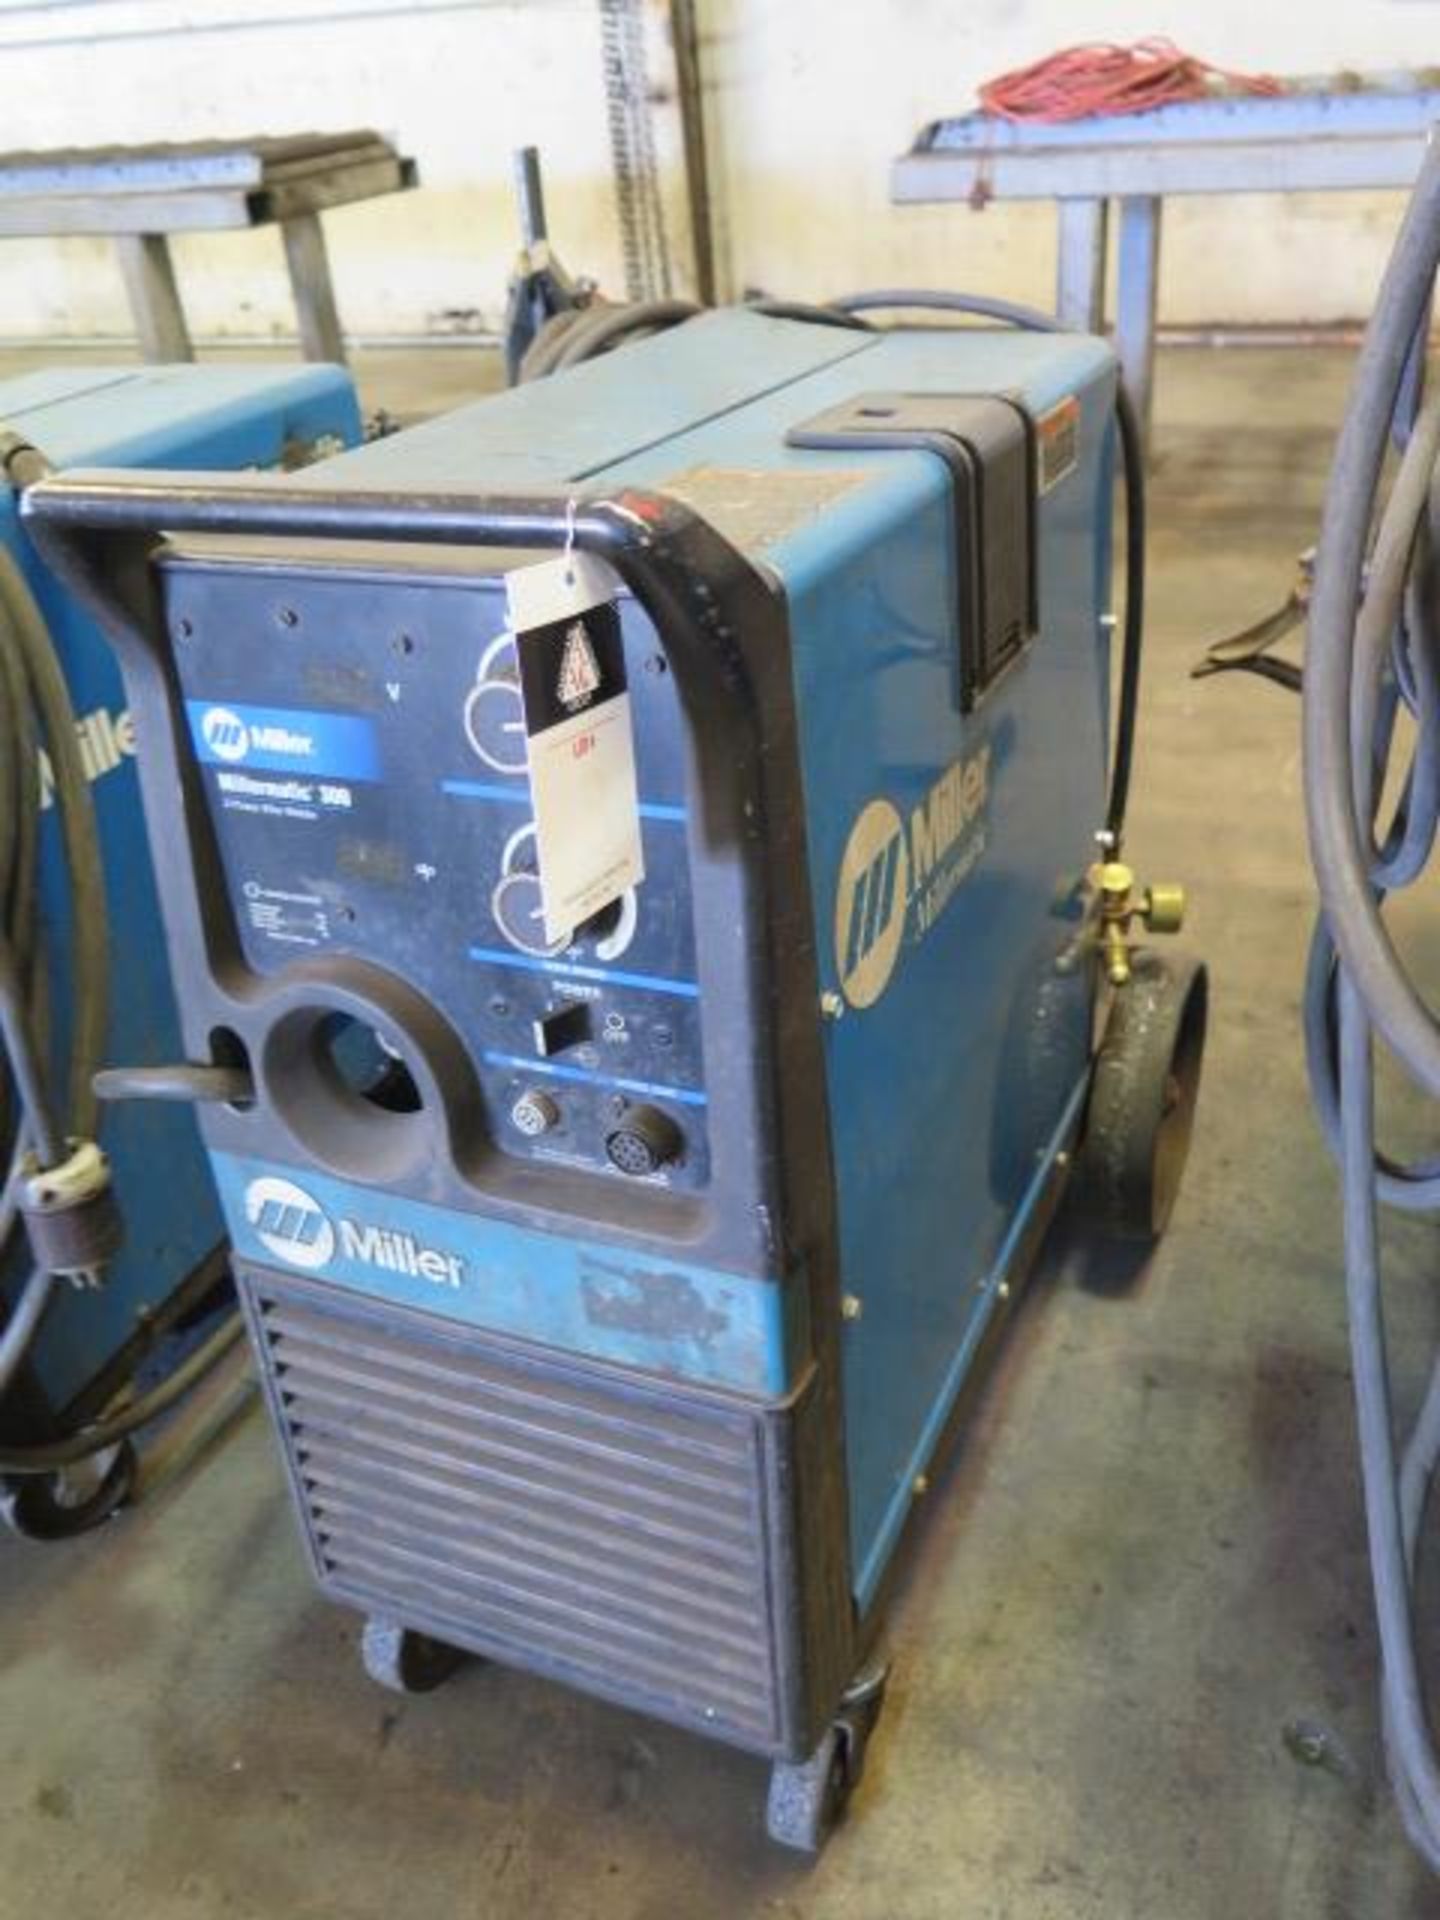 Miller Millermatic 300 Arc Welding Power Source / Wire Feeder (SOLD AS-IS - NO WARRANTY) - Image 2 of 6